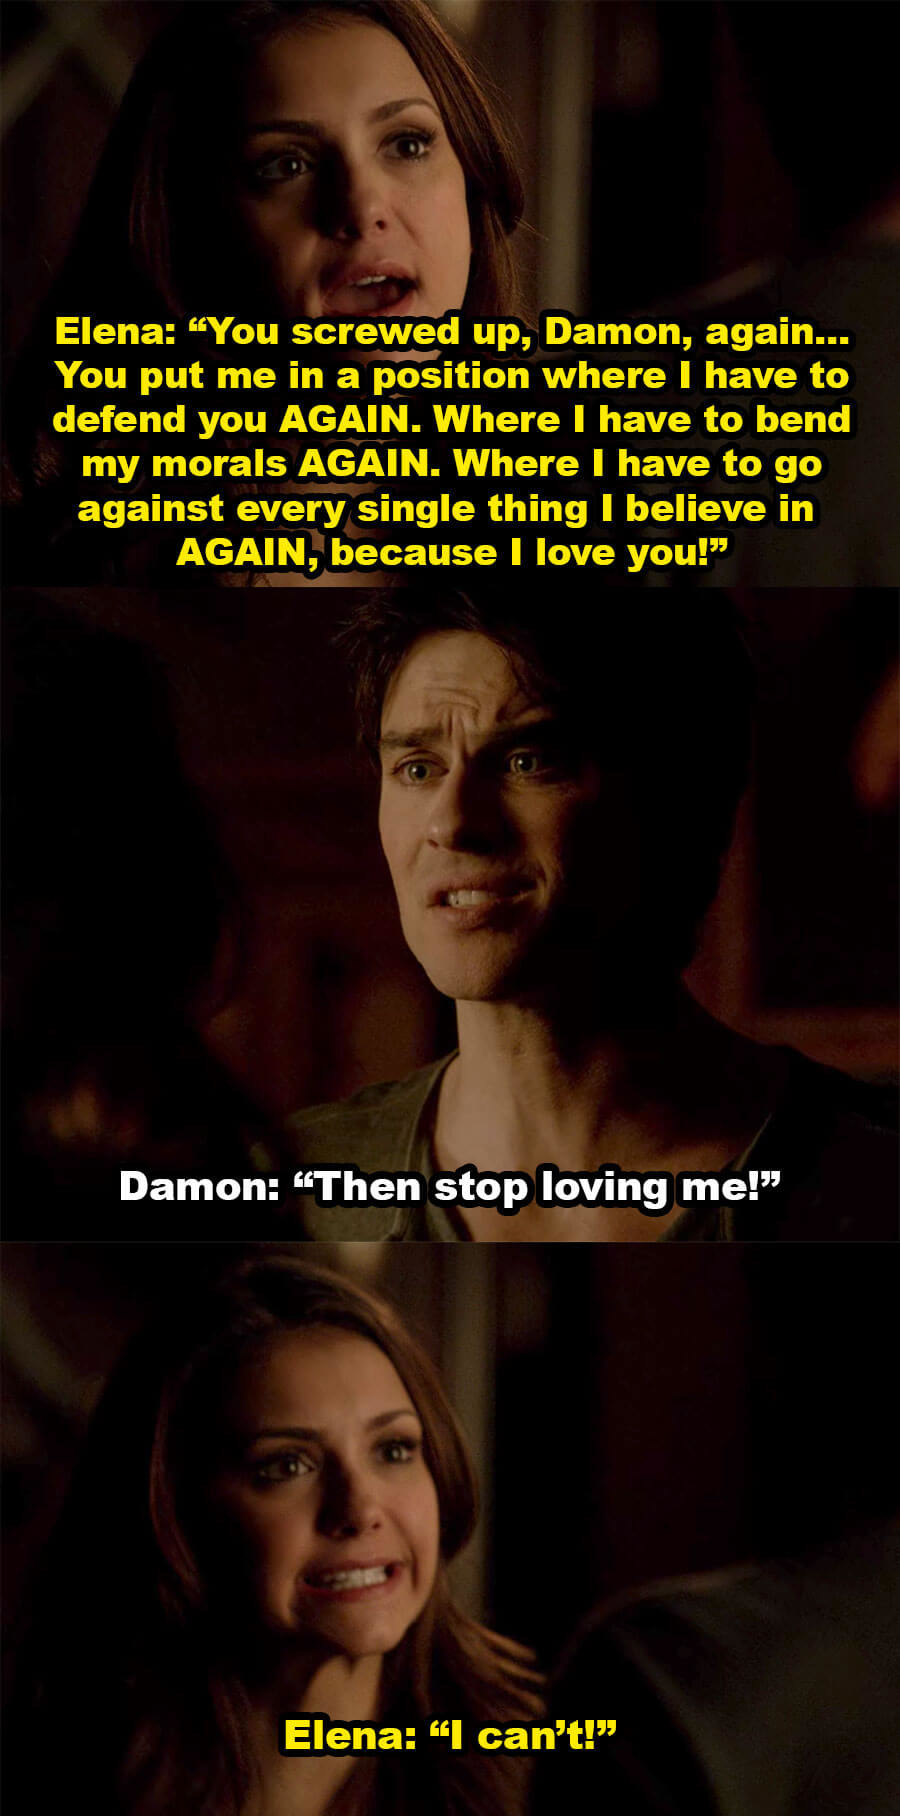 Elena yells at Damon for putting her in a position where she has to defend him and bend her morals again, because she loves him, and Damon says she should stop loving him, but Elena says she can&#x27;t